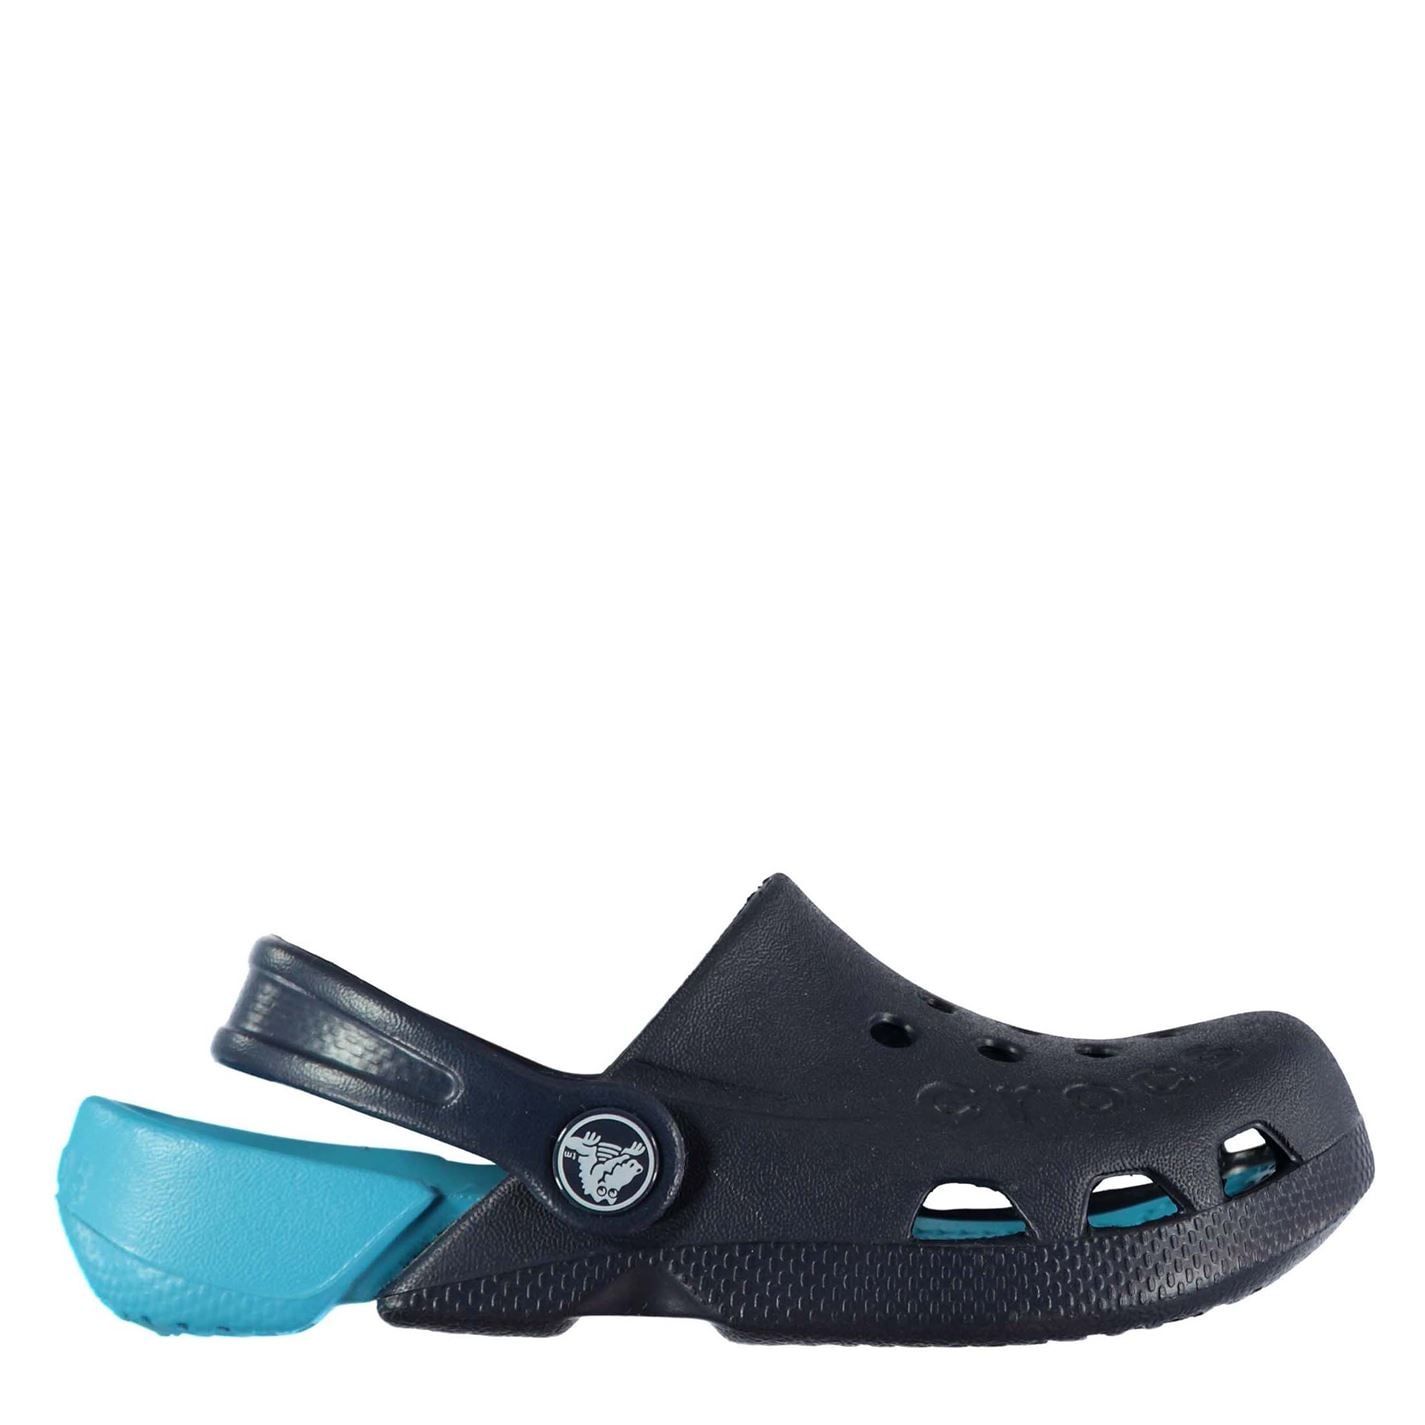 <strong> Crocs Electro Clogs Unisex Infant</strong><br><br> 
A classic wear with an added stylish touch, the Crocs Electro Clogs - an easy slip on design with colour contrasting heel sling strap, textured and cushioned foot bed and decorative breathability perforations. Crocs branding makes for a signature wear.

<br><br>> Unisex infant sandals 
<br>> Slip on design 
<br>> Colour contrasting heel/sling strap
<br>> Textured and cushioned foot bed
<br>> Decorative breathability perforations
<br>> Crocs branding 
<br>> Upper/Inner/Sole: Synthetic